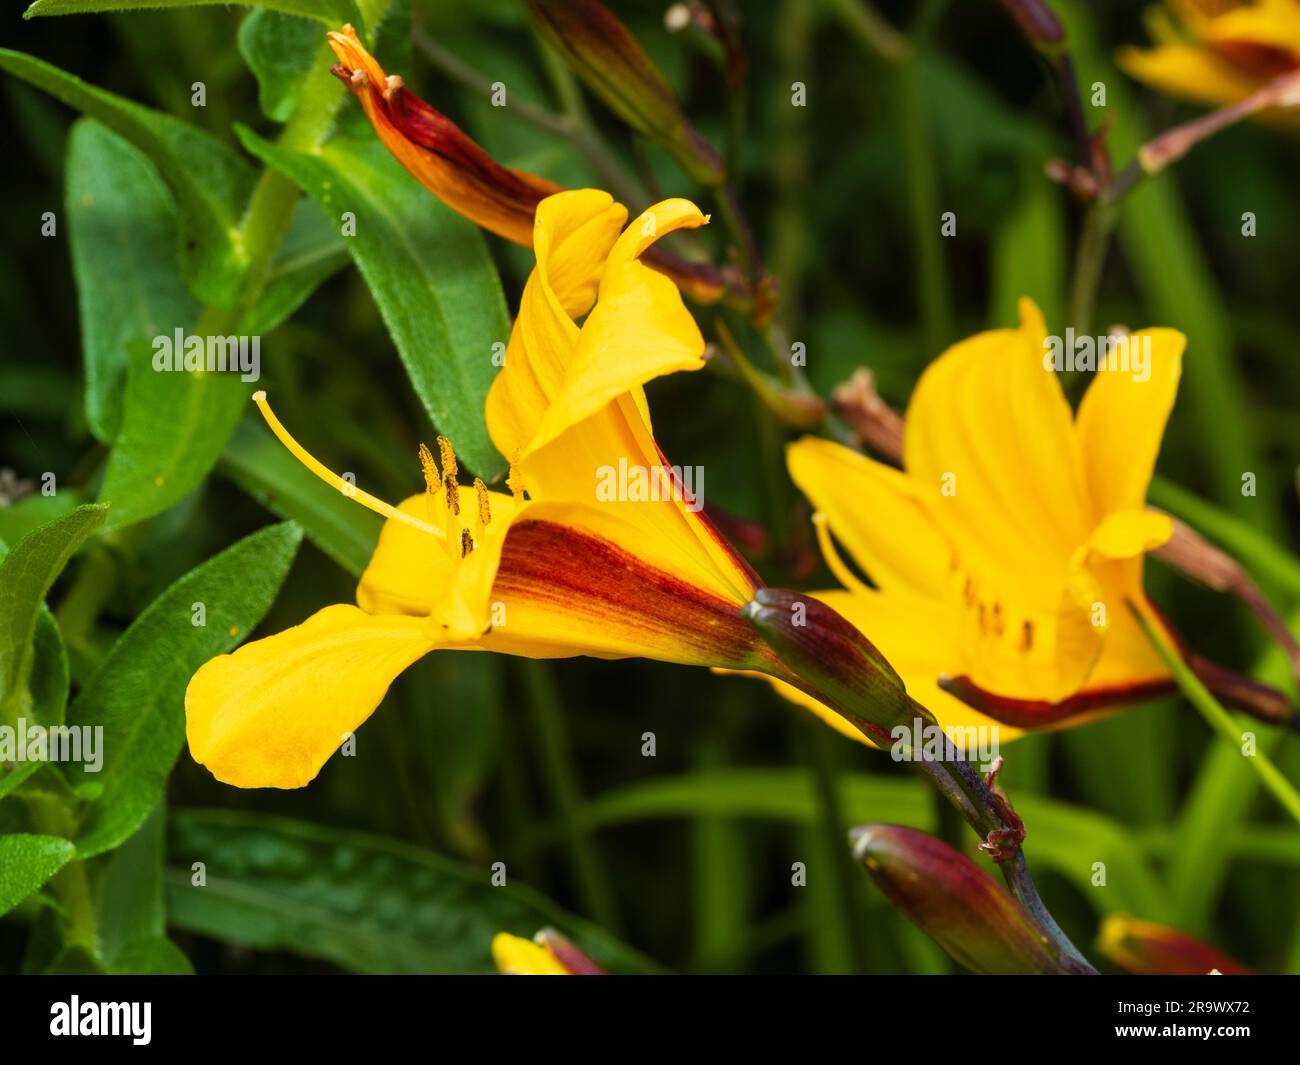 Brown exterior and yellow flower of Hemerocallis 'Golden Chimes', a fragrant day lily Stock Photo